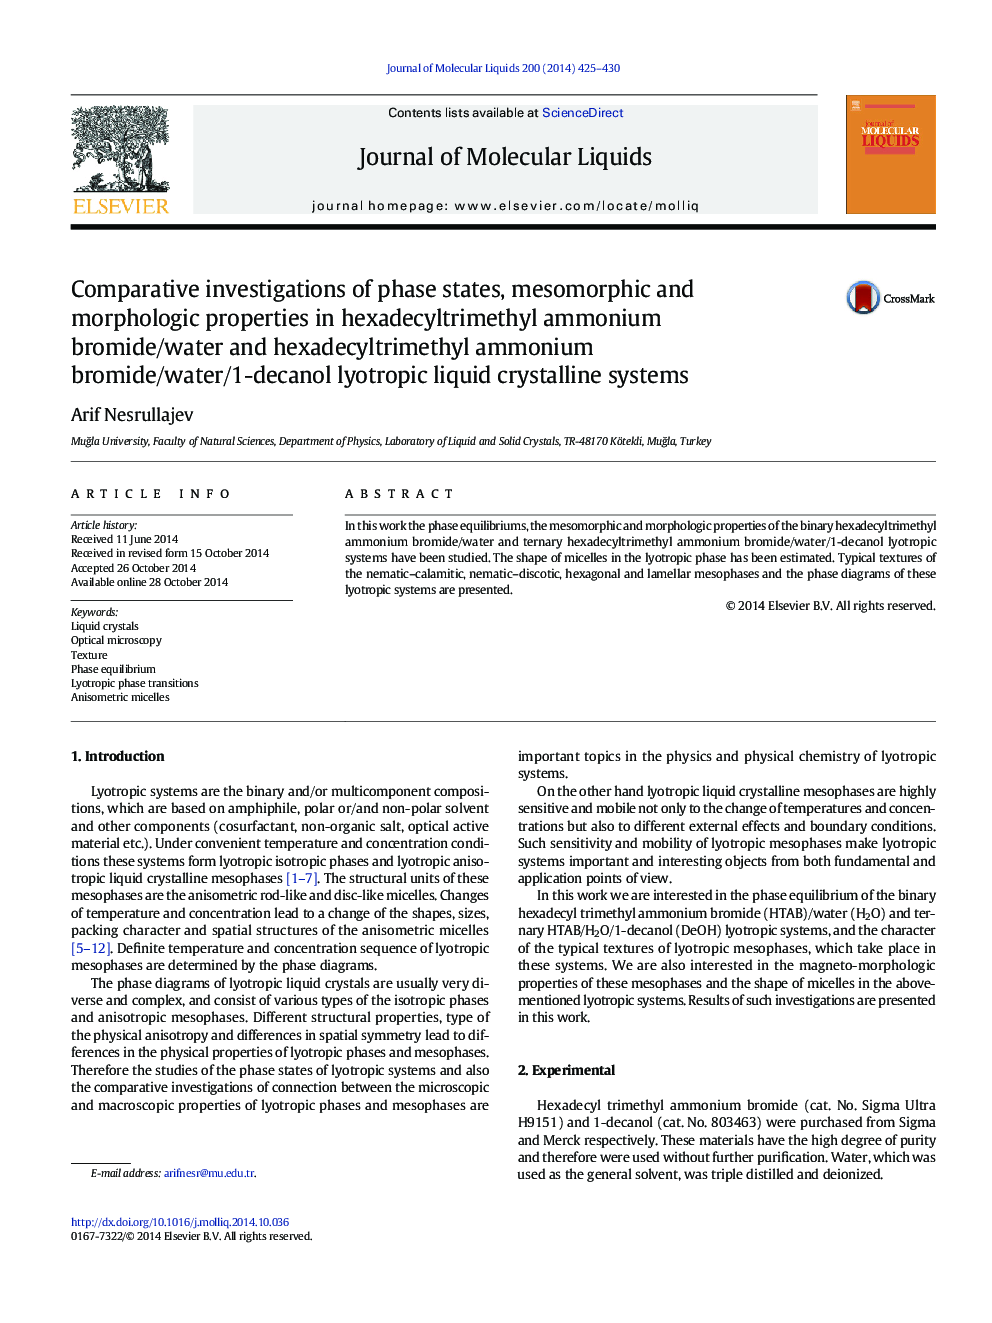 Comparative investigations of phase states, mesomorphic and morphologic properties in hexadecyltrimethyl ammonium bromide/water and hexadecyltrimethyl ammonium bromide/water/1-decanol lyotropic liquid crystalline systems